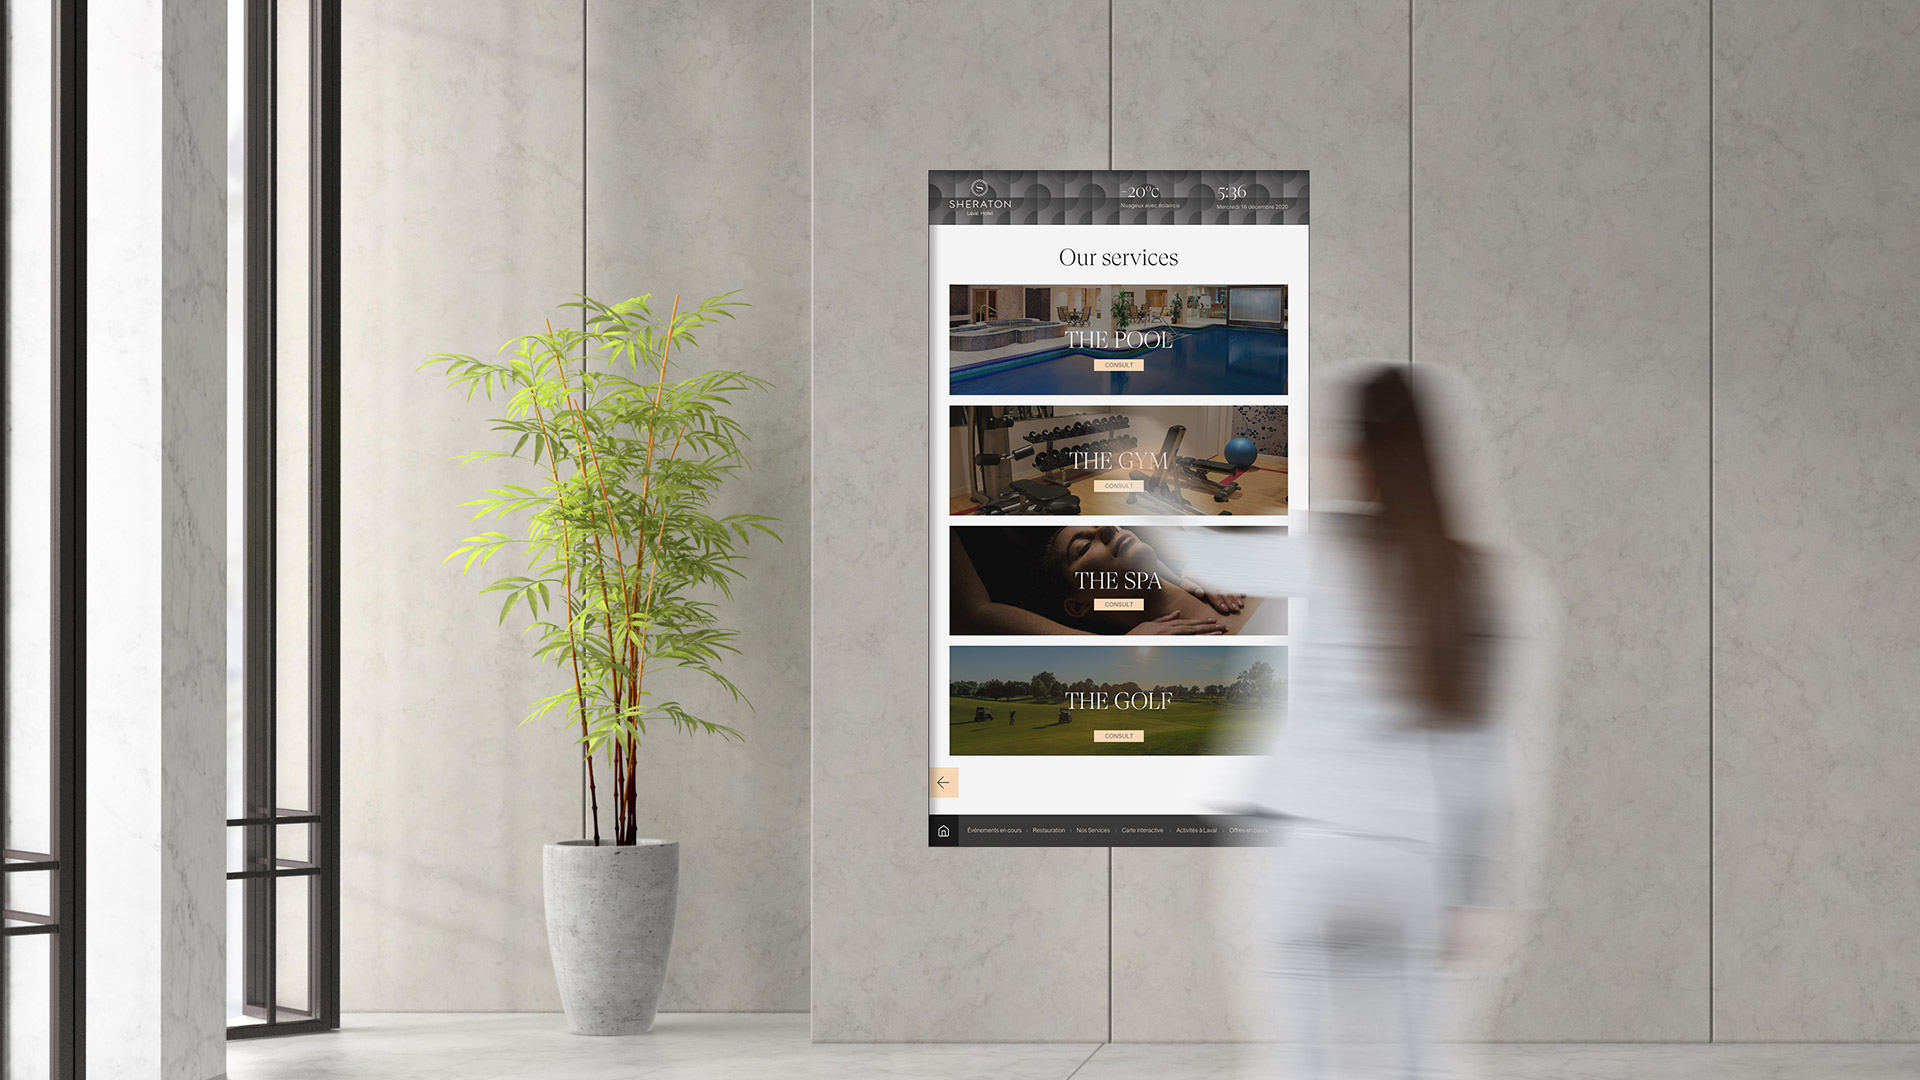 Help your hotel guests with interactive signage